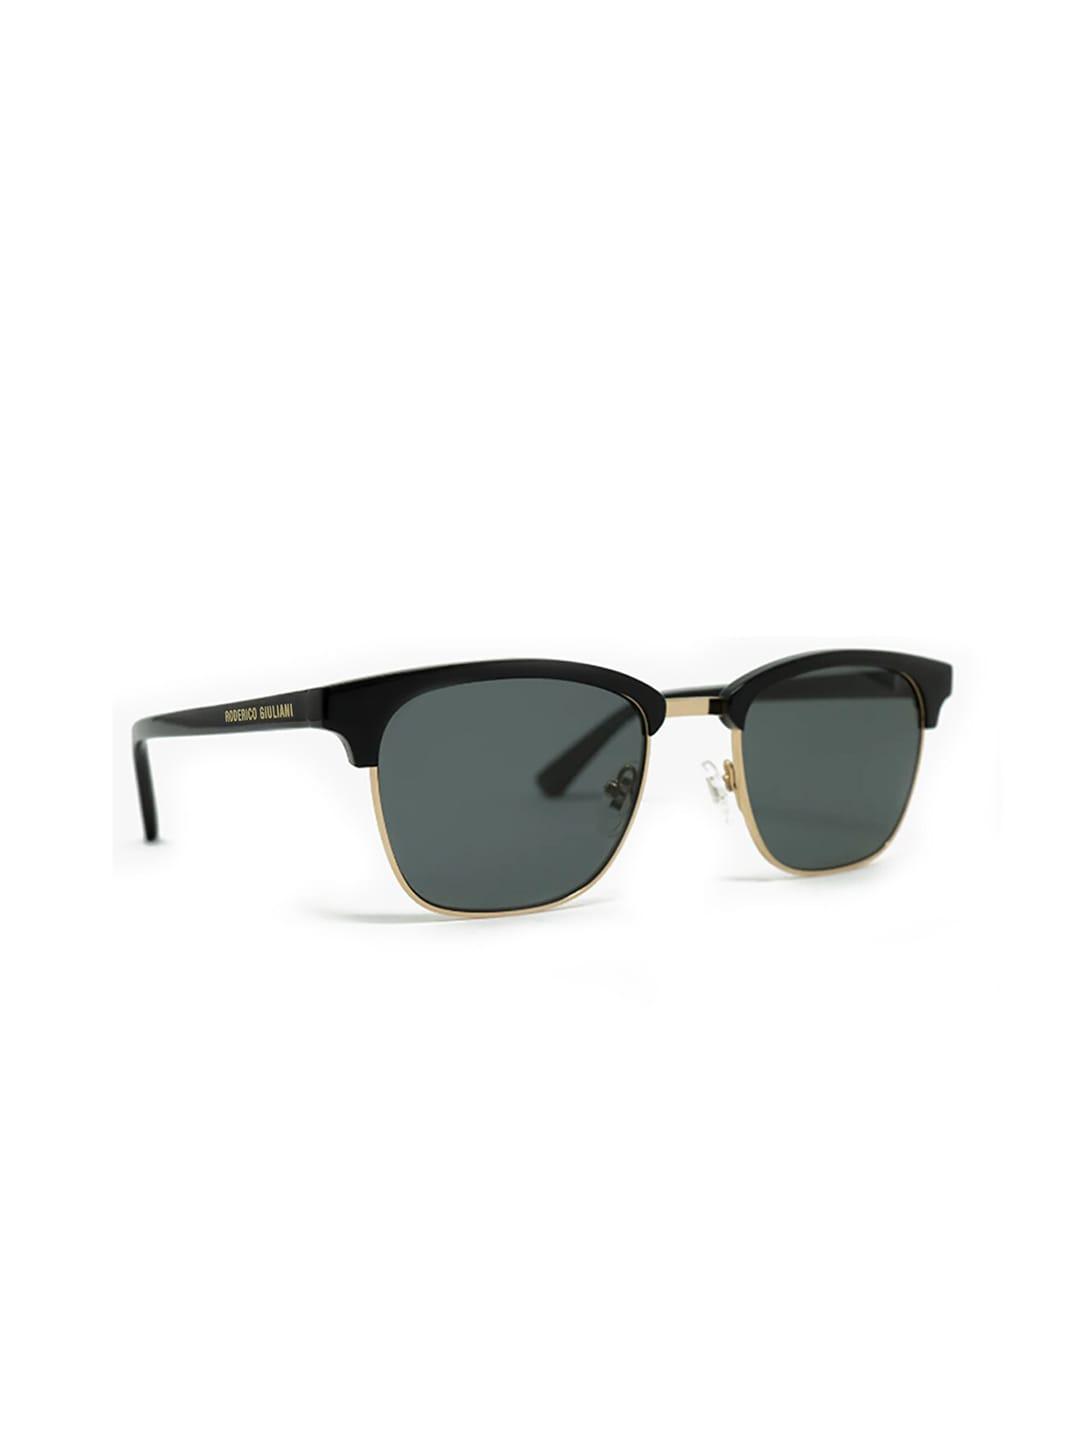 roderico-giuliani-square-sunglasses-with-polarised-and-uv-protected-lens